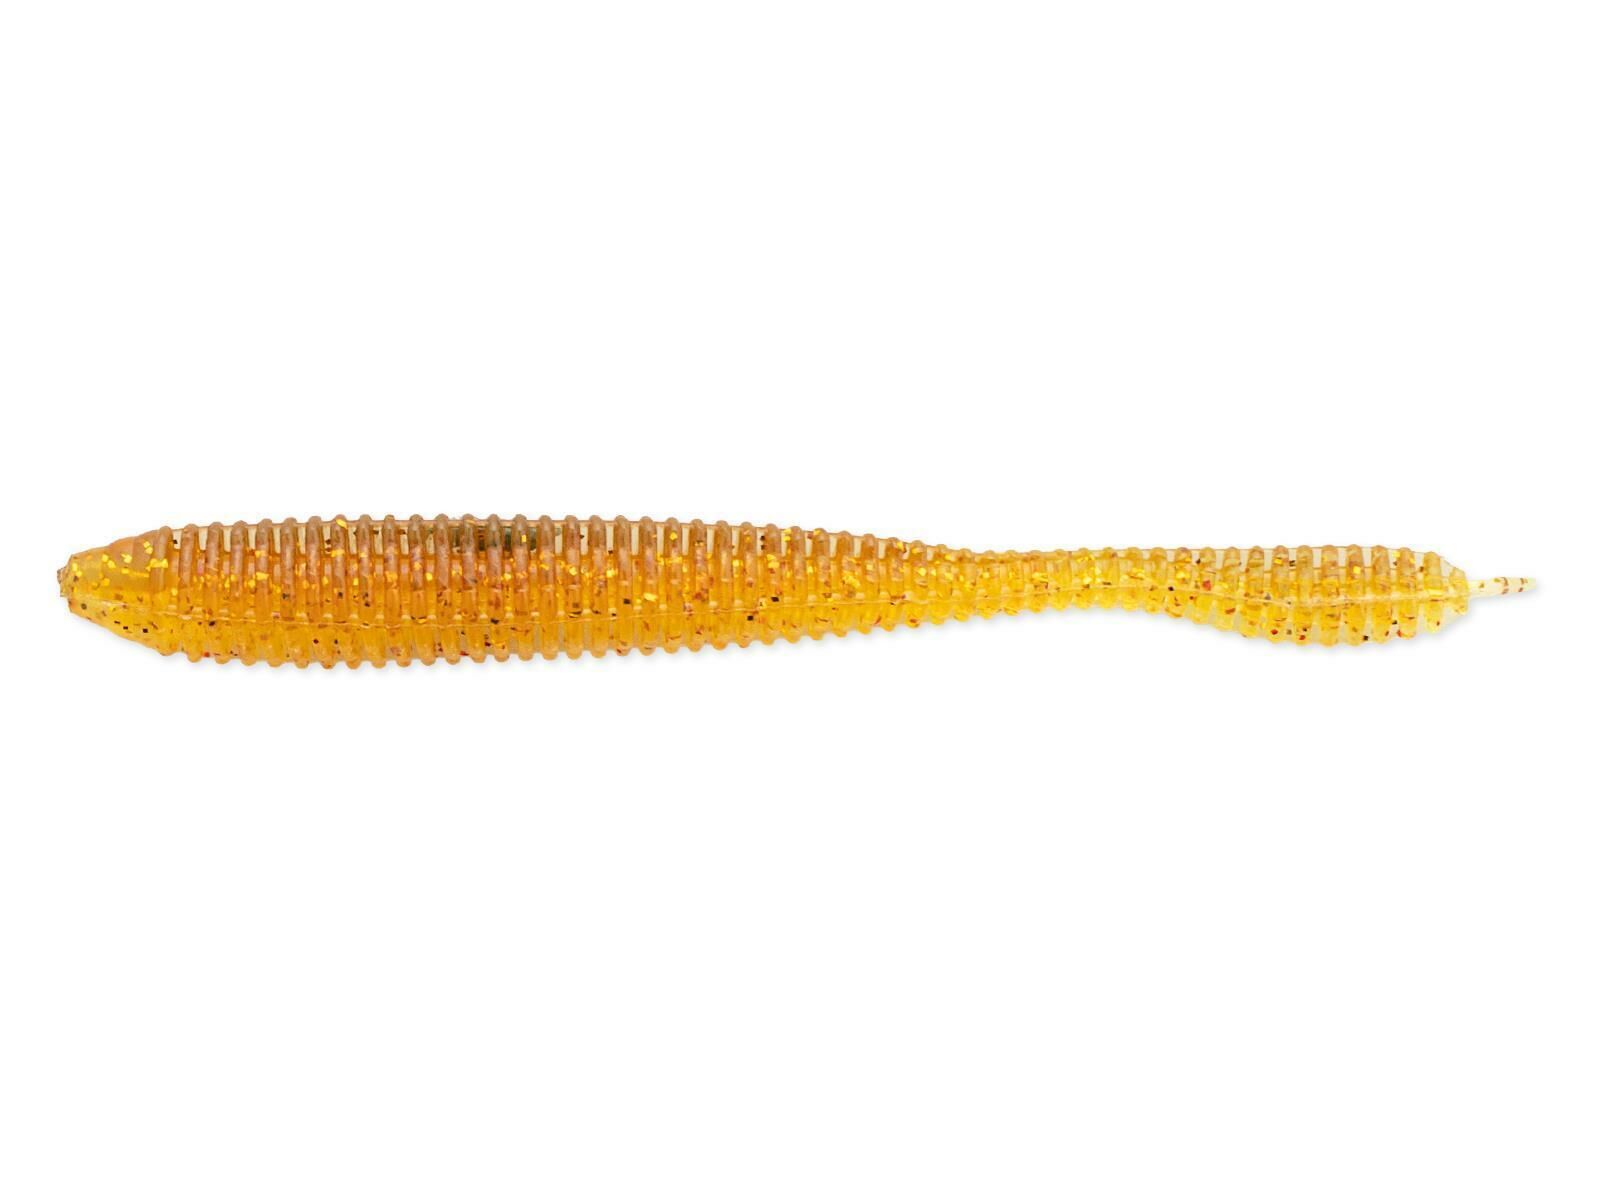 3" Bubbling Shaker - Golden Goby (BA-Edition)